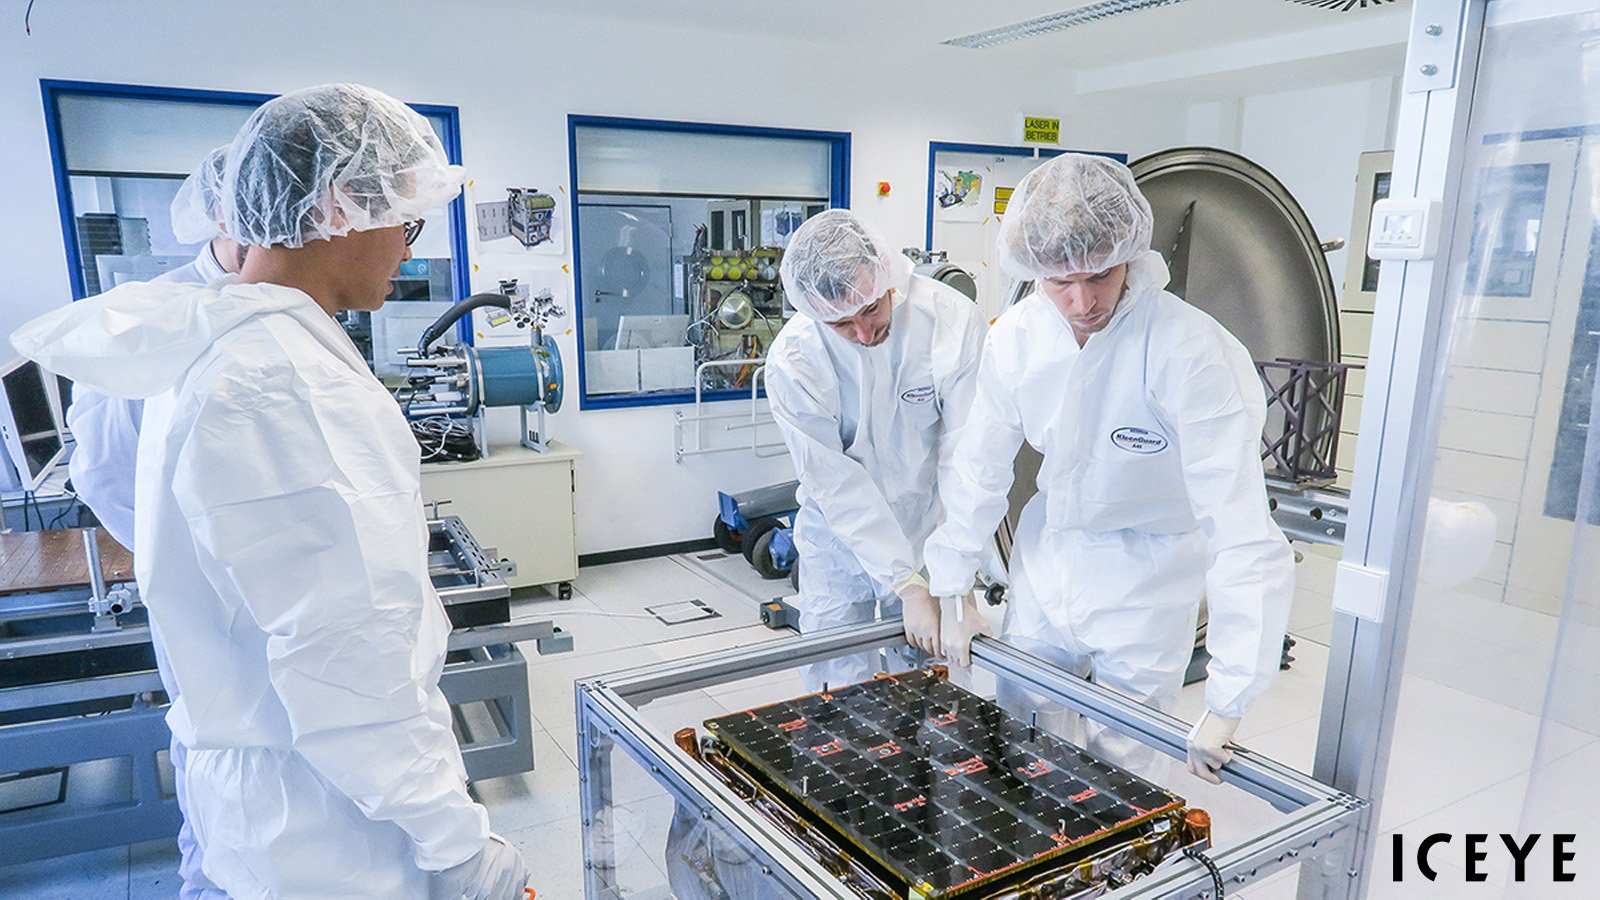 ICEYE specialists inspecting an ICEYE SAR satellite in a clean room.